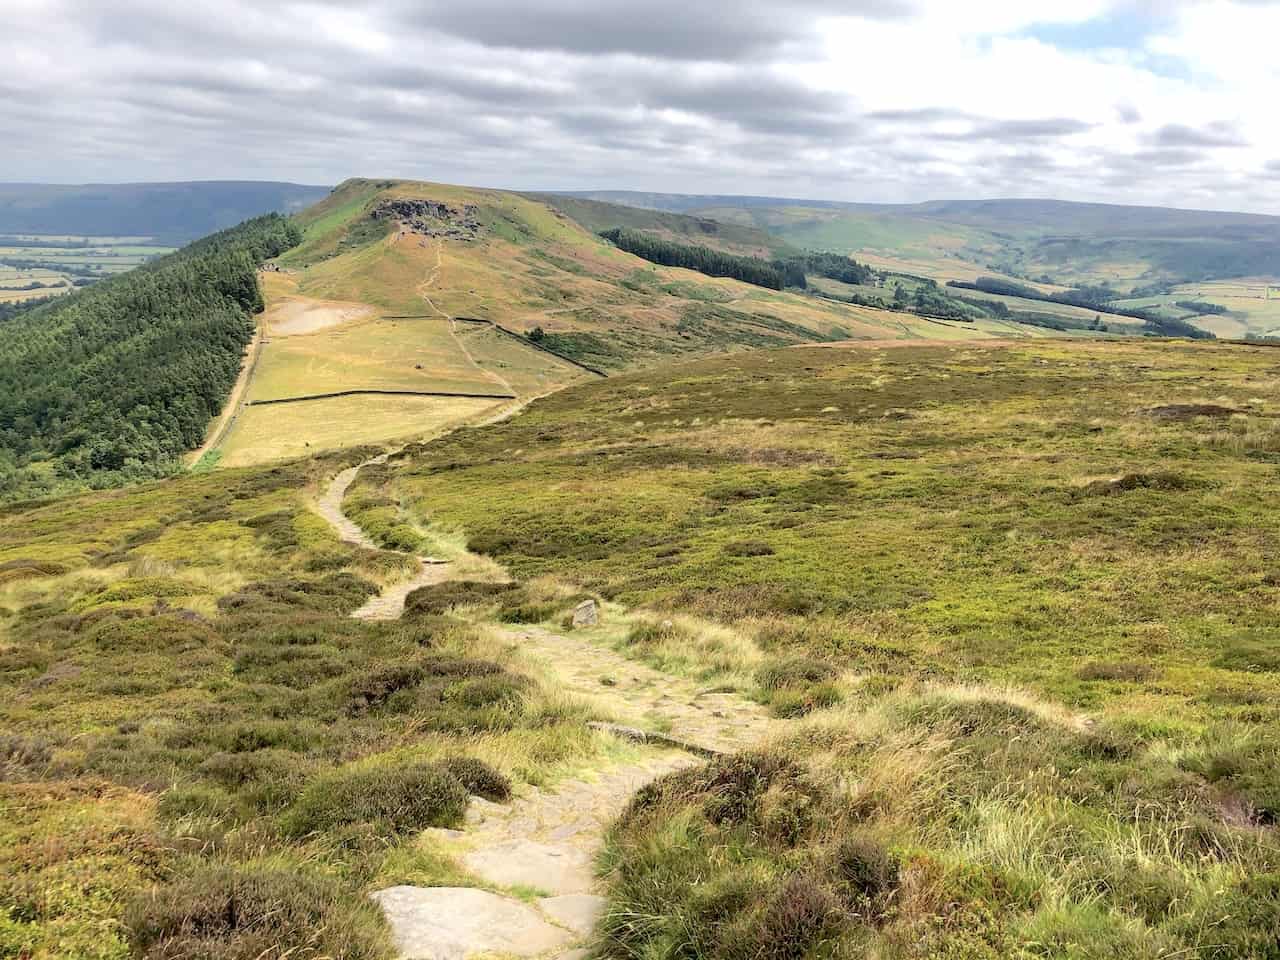 Embarking on this Wainstones walk, heading east and leaving Cold Moor via the Cleveland Way, leads to a stimulating ascent up Hasty Bank to reach the Wainstones.